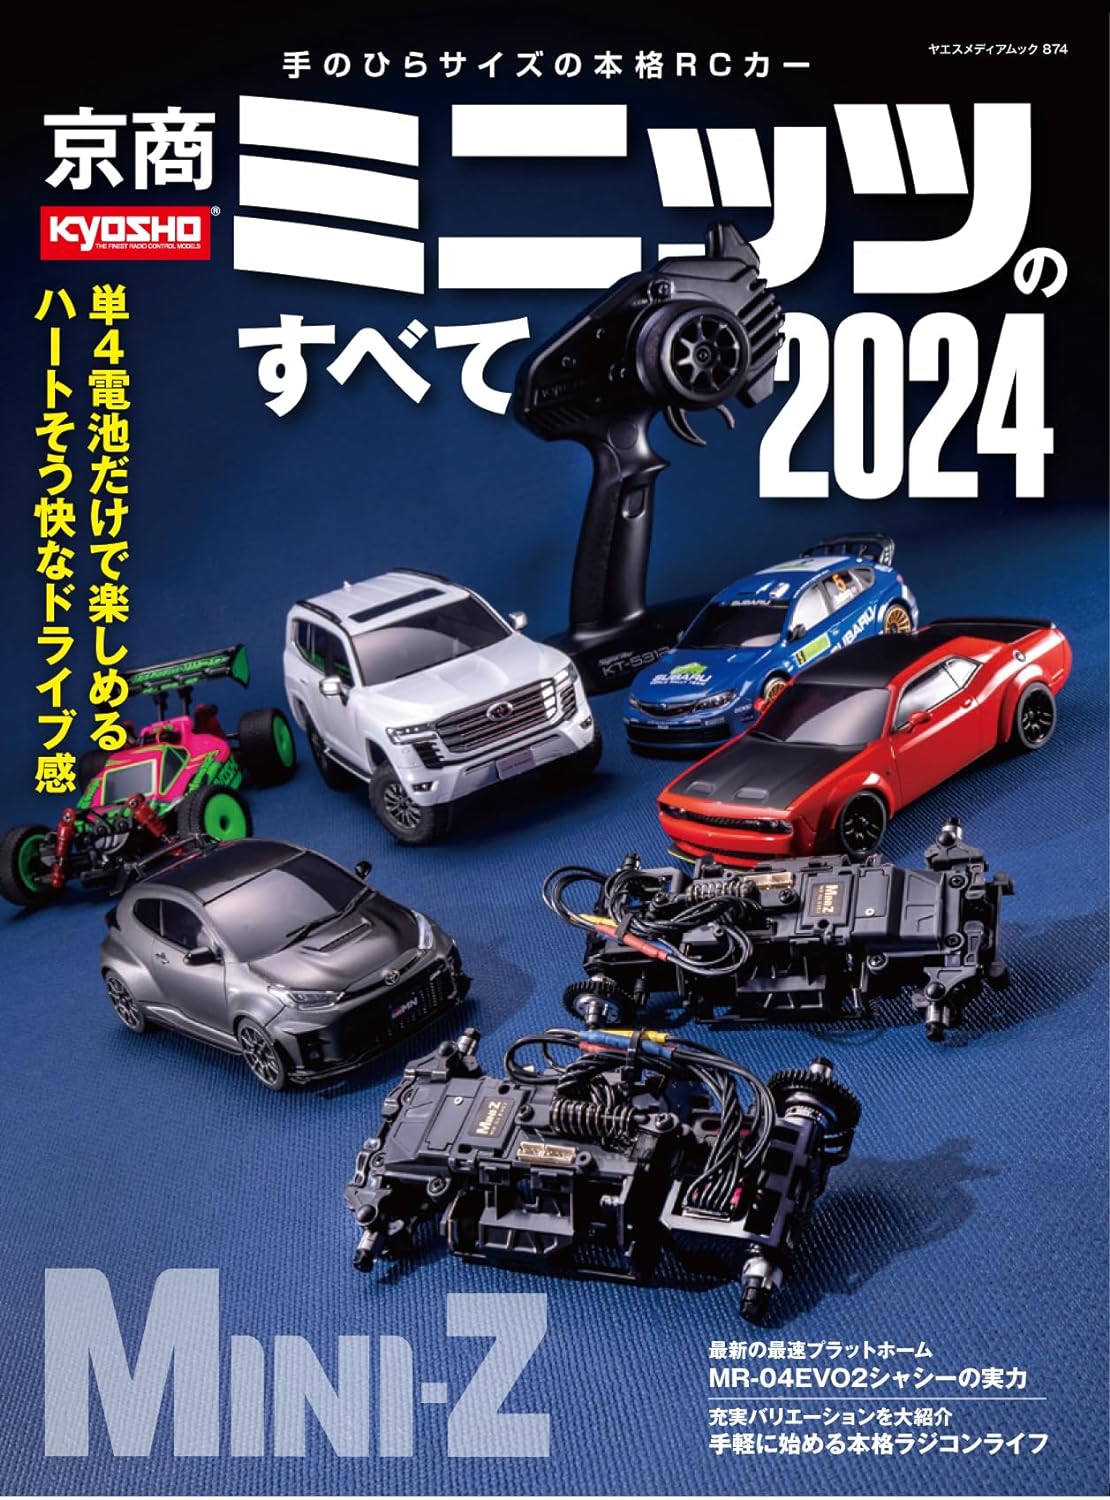 All About Kyosho Mini-Z 2024